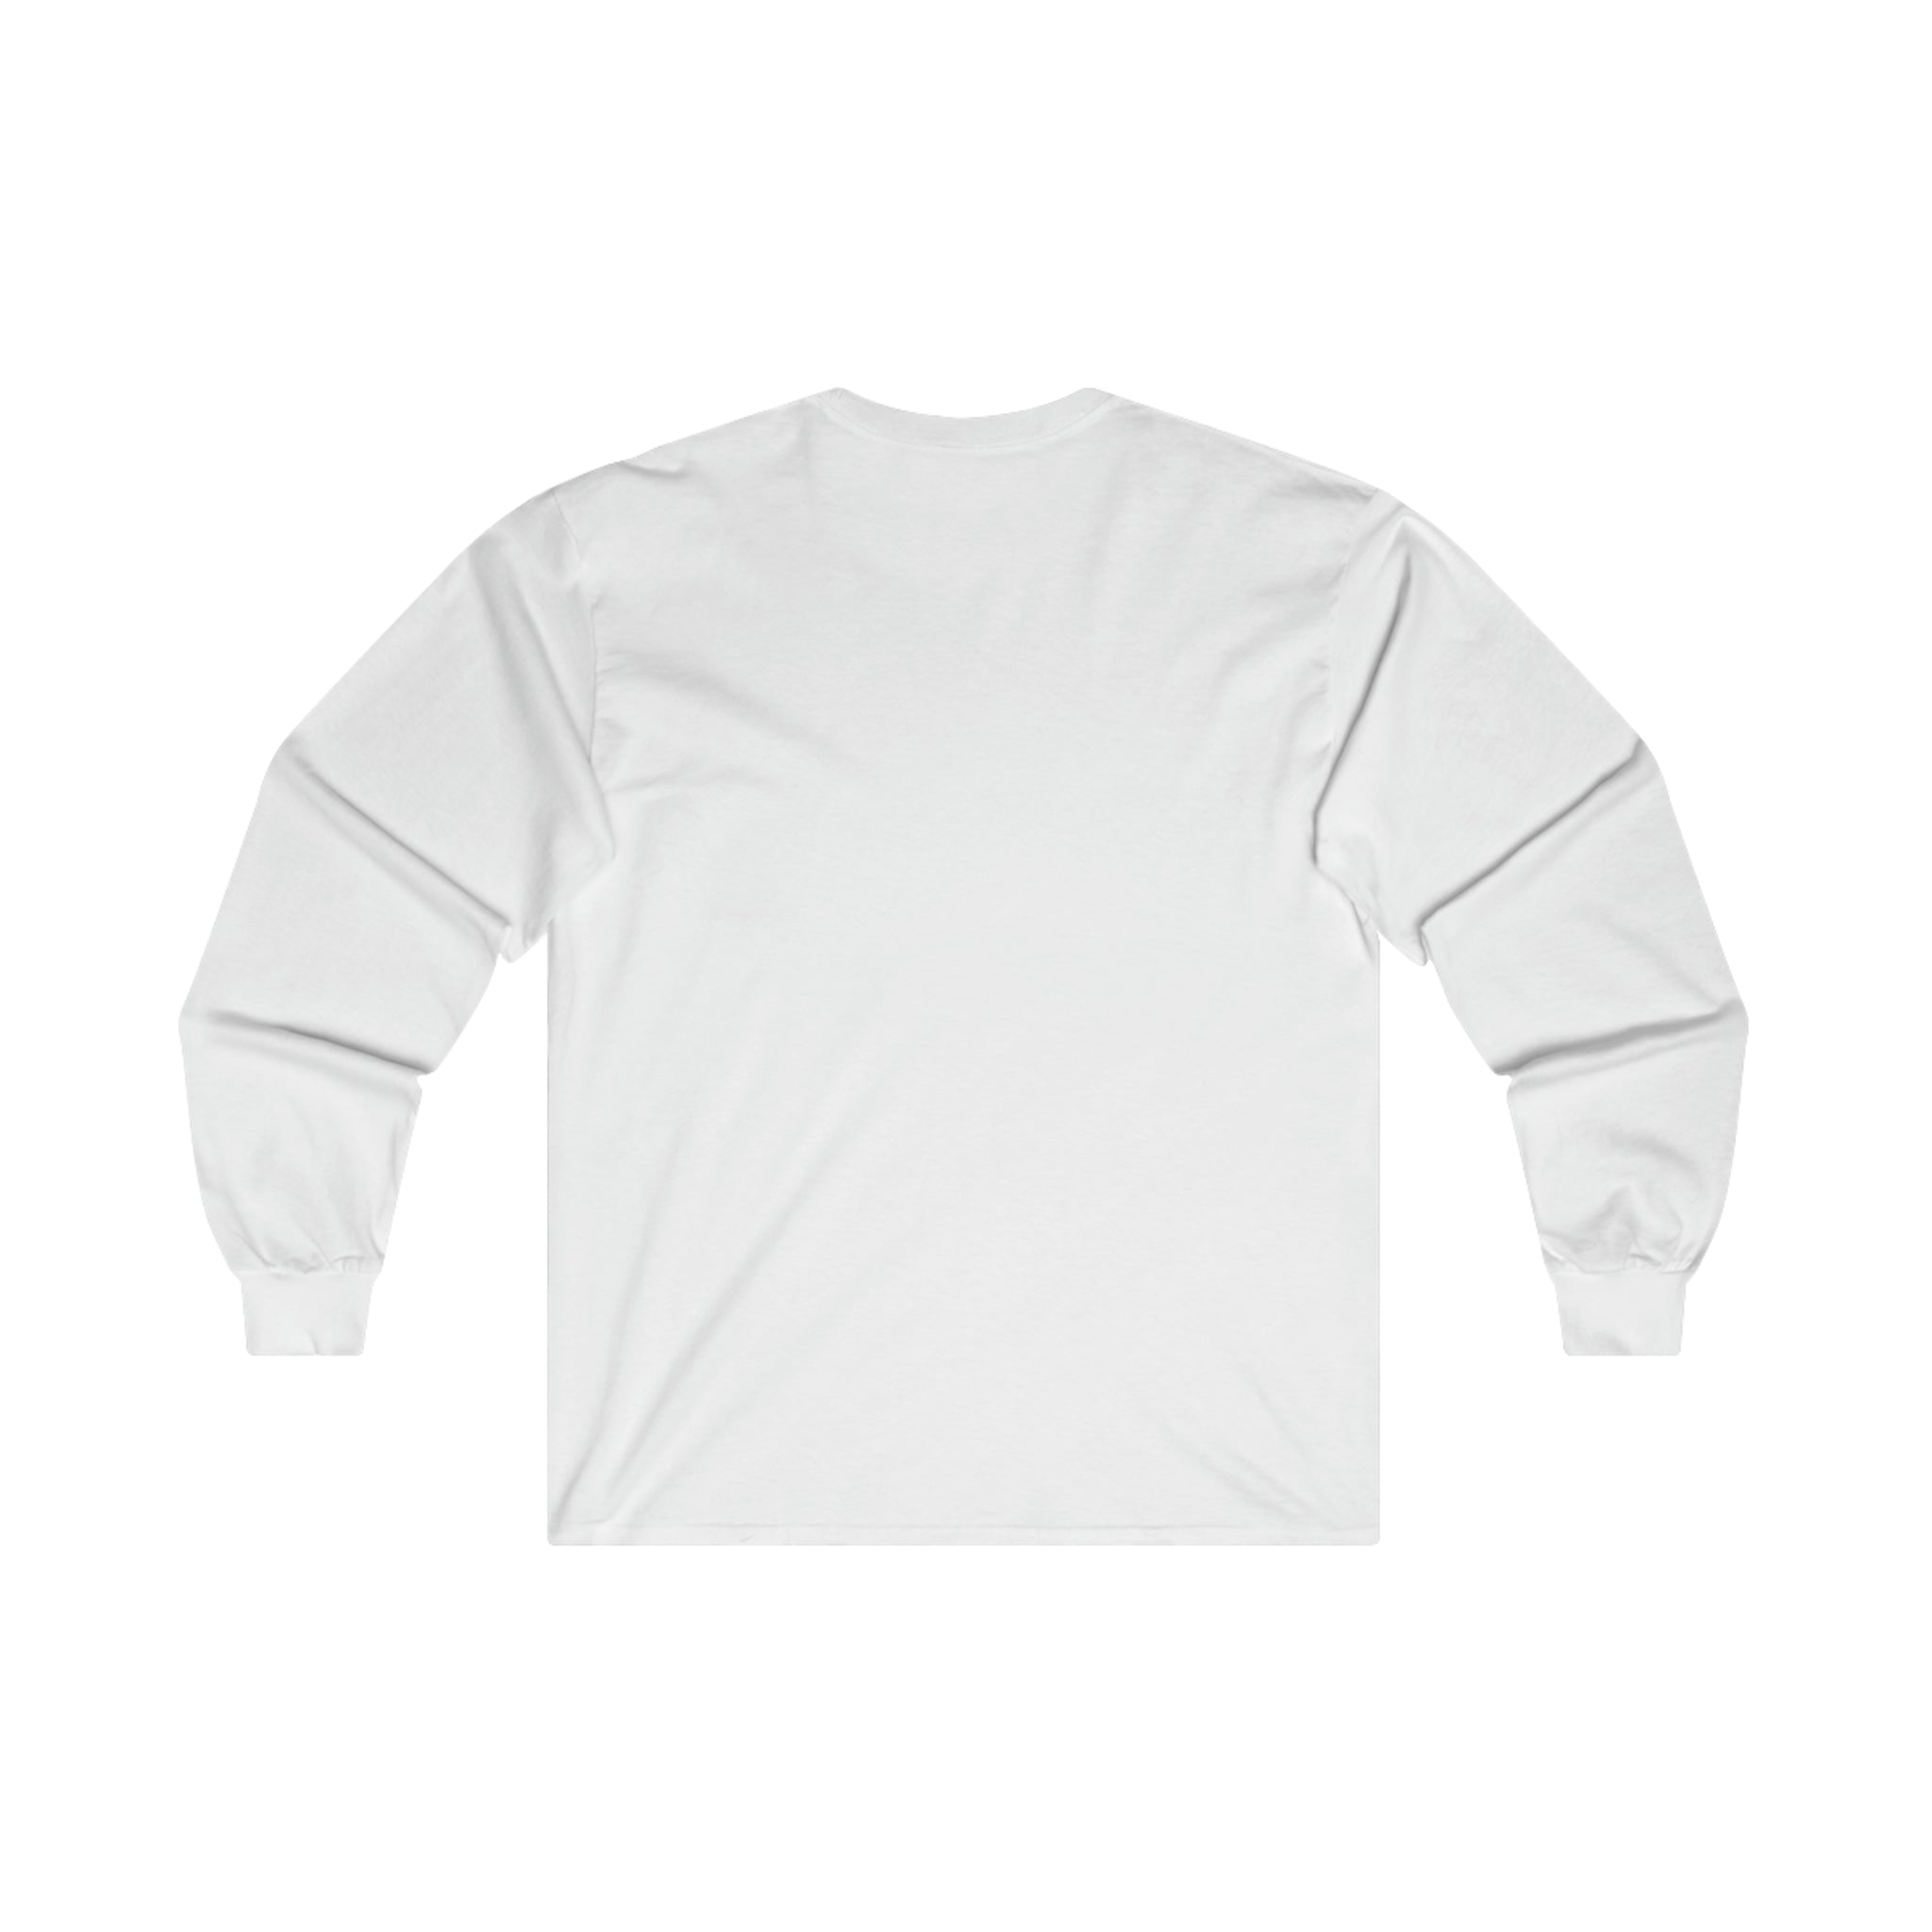 Jordan and Pippen Miller and Zyns - Ultra Cotton Long Sleeve Tee